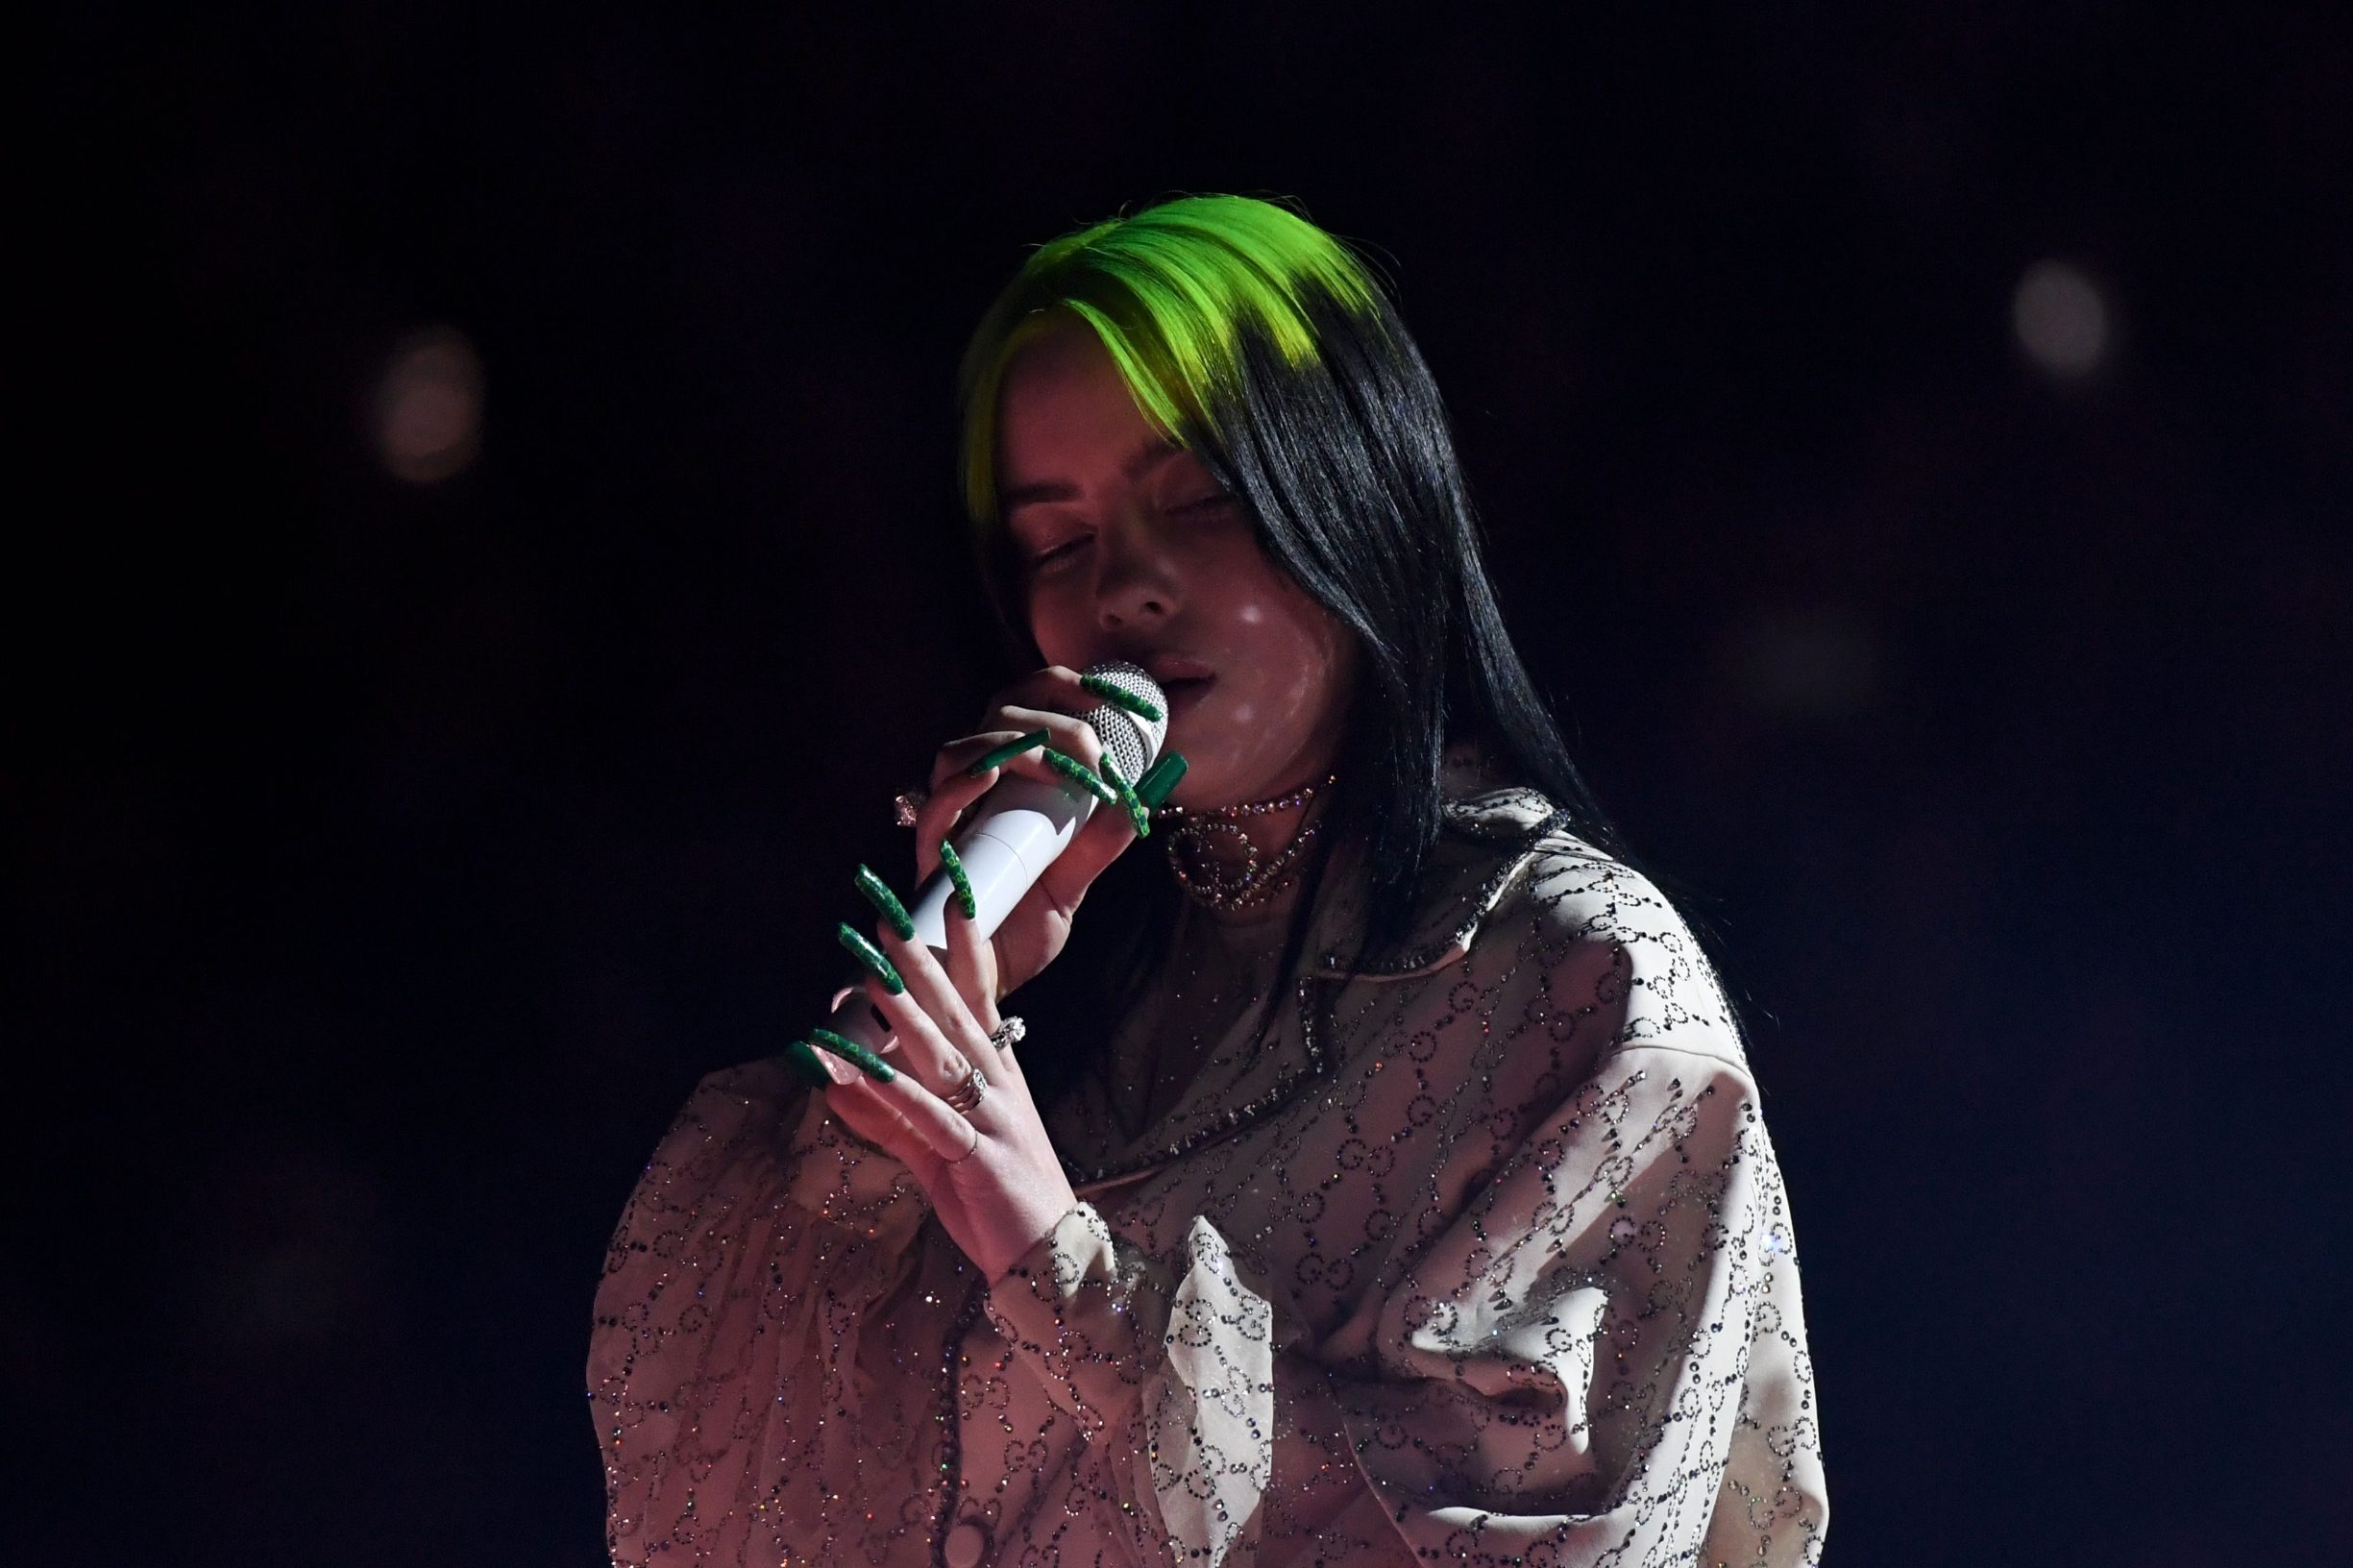 US singer-songwriter Billie Eilish performs during the 62nd Annual Grammy Awards on January 26, 2020, in Los Angeles. (Photo by Robyn Beck / AFP)